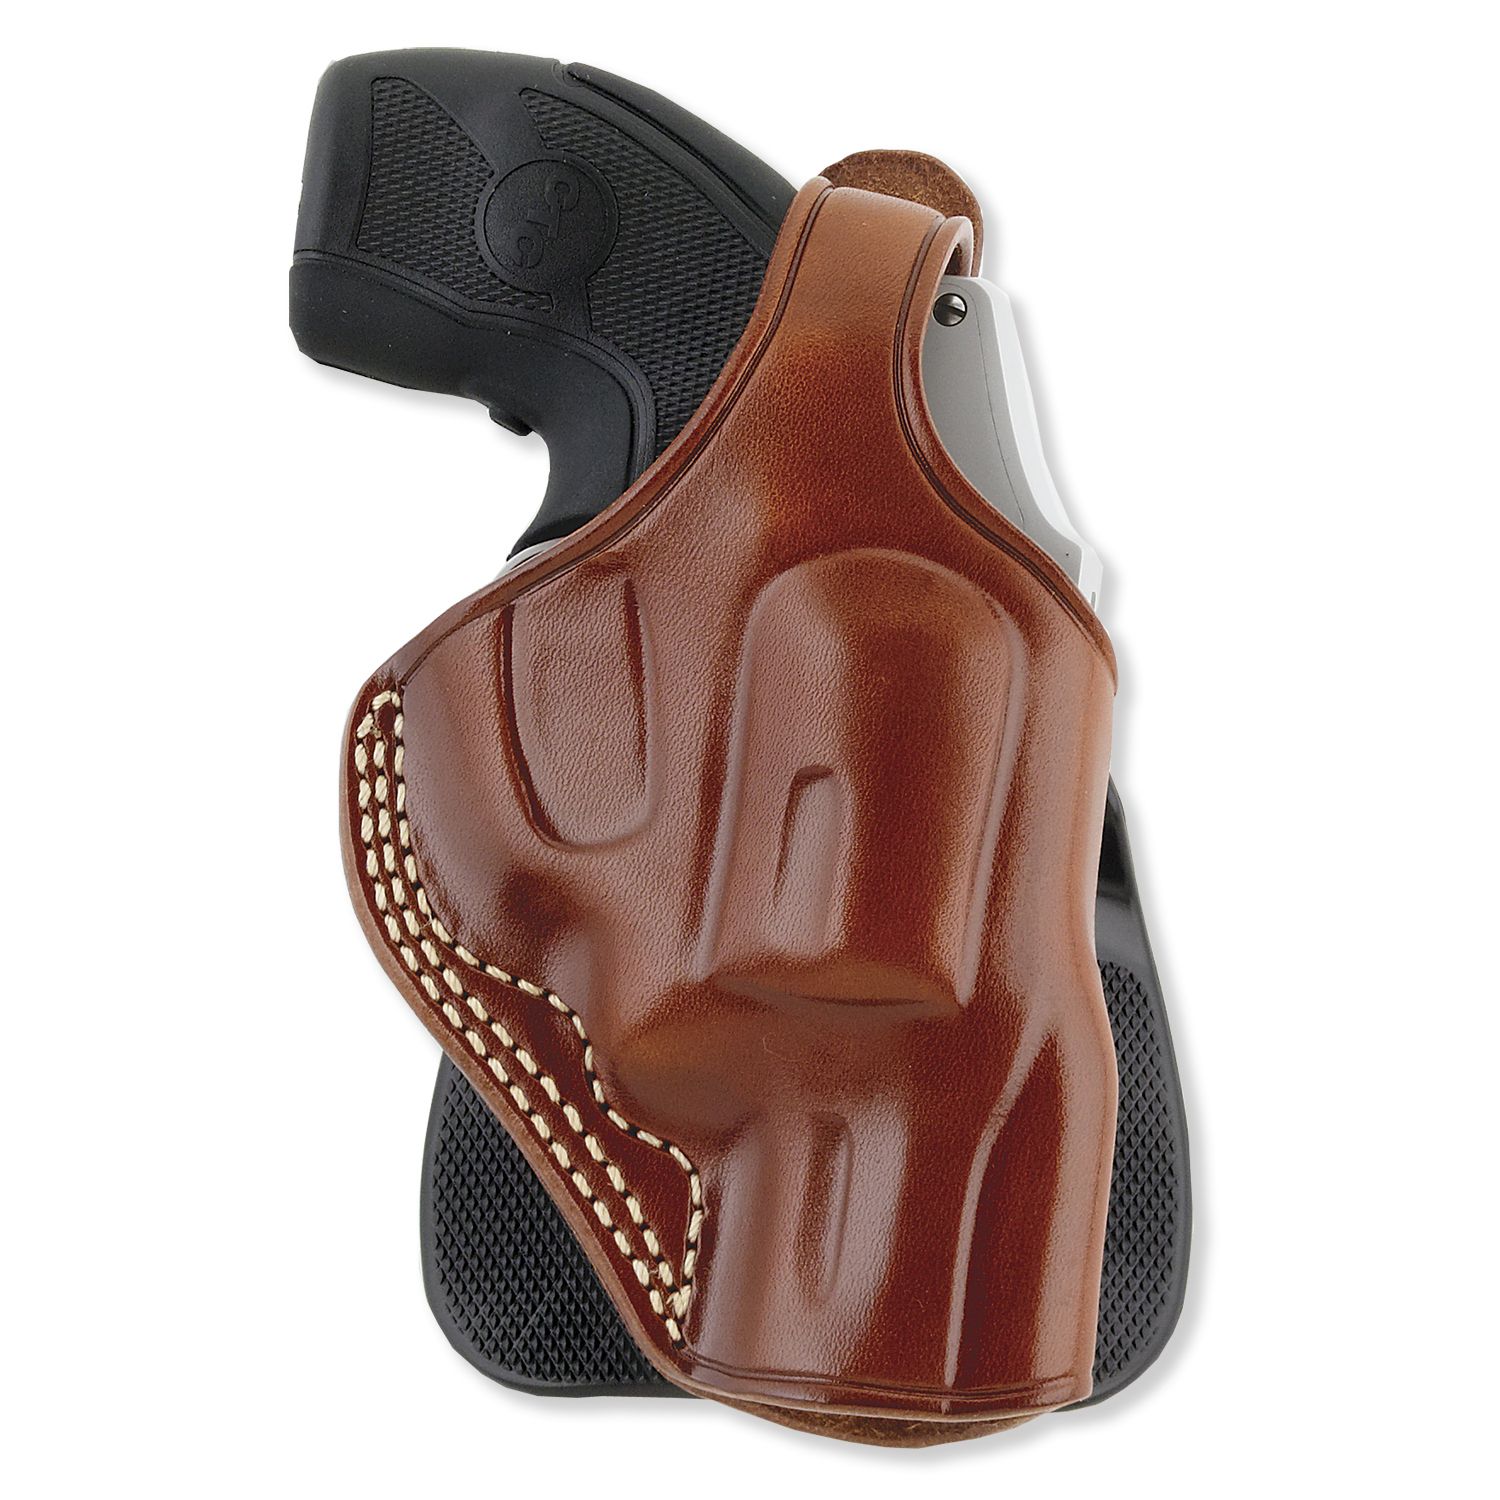 Galco Professional Law Enforcement Paddle Holster Right Hand Tan - : PLE224